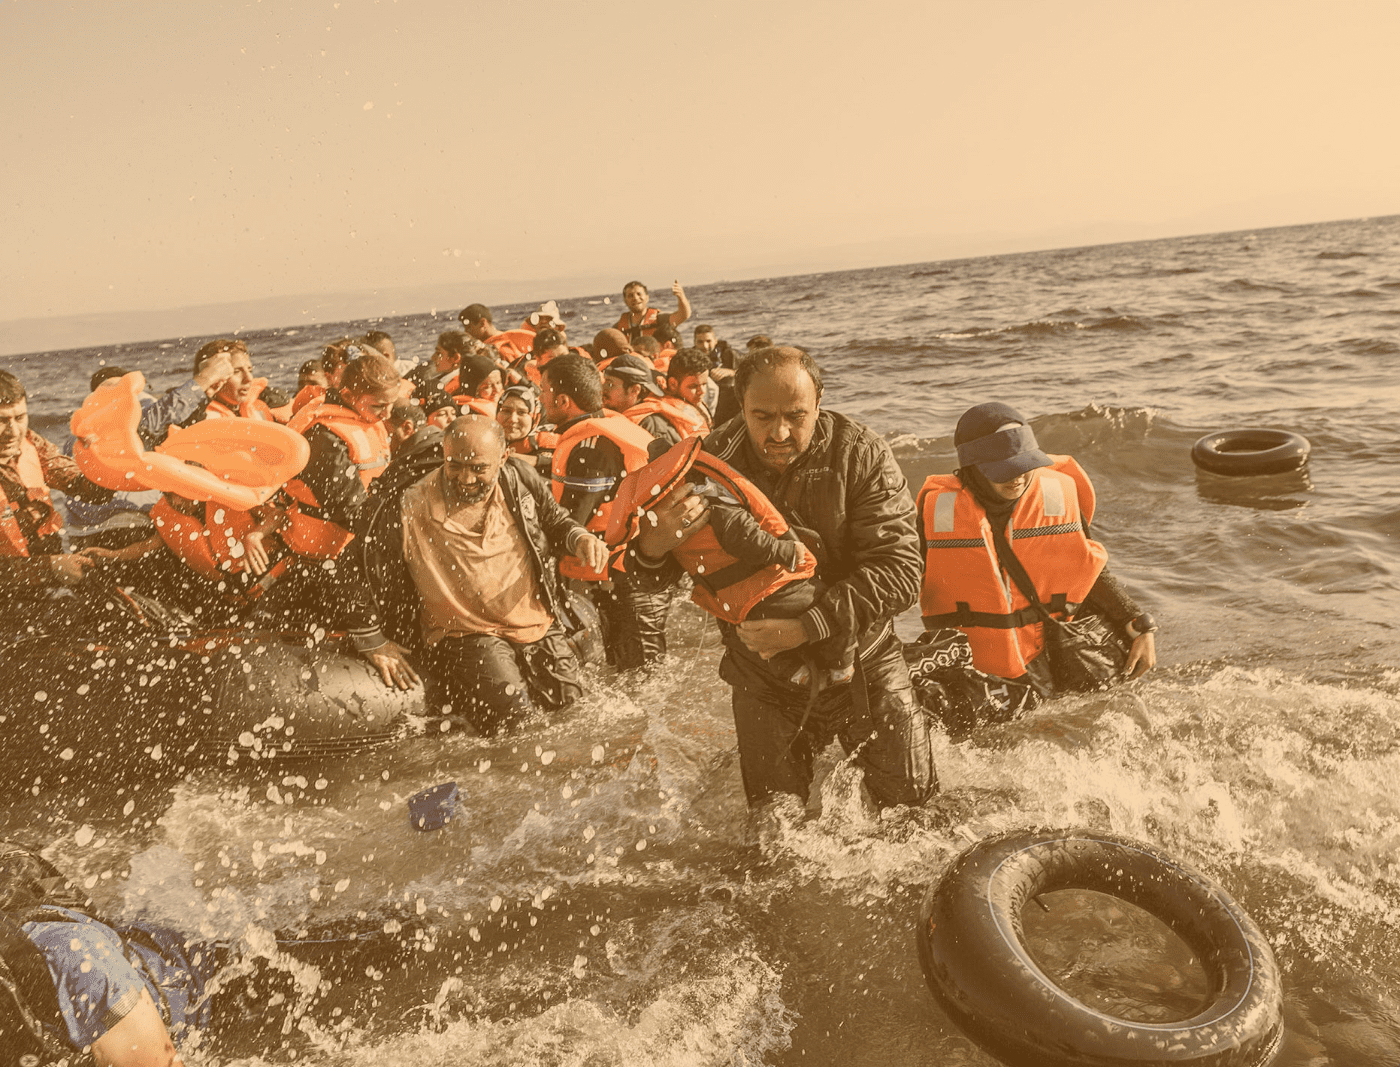 Martin Aidnik – The Shadow of Lives Lost in the Mediterranean Over Europe